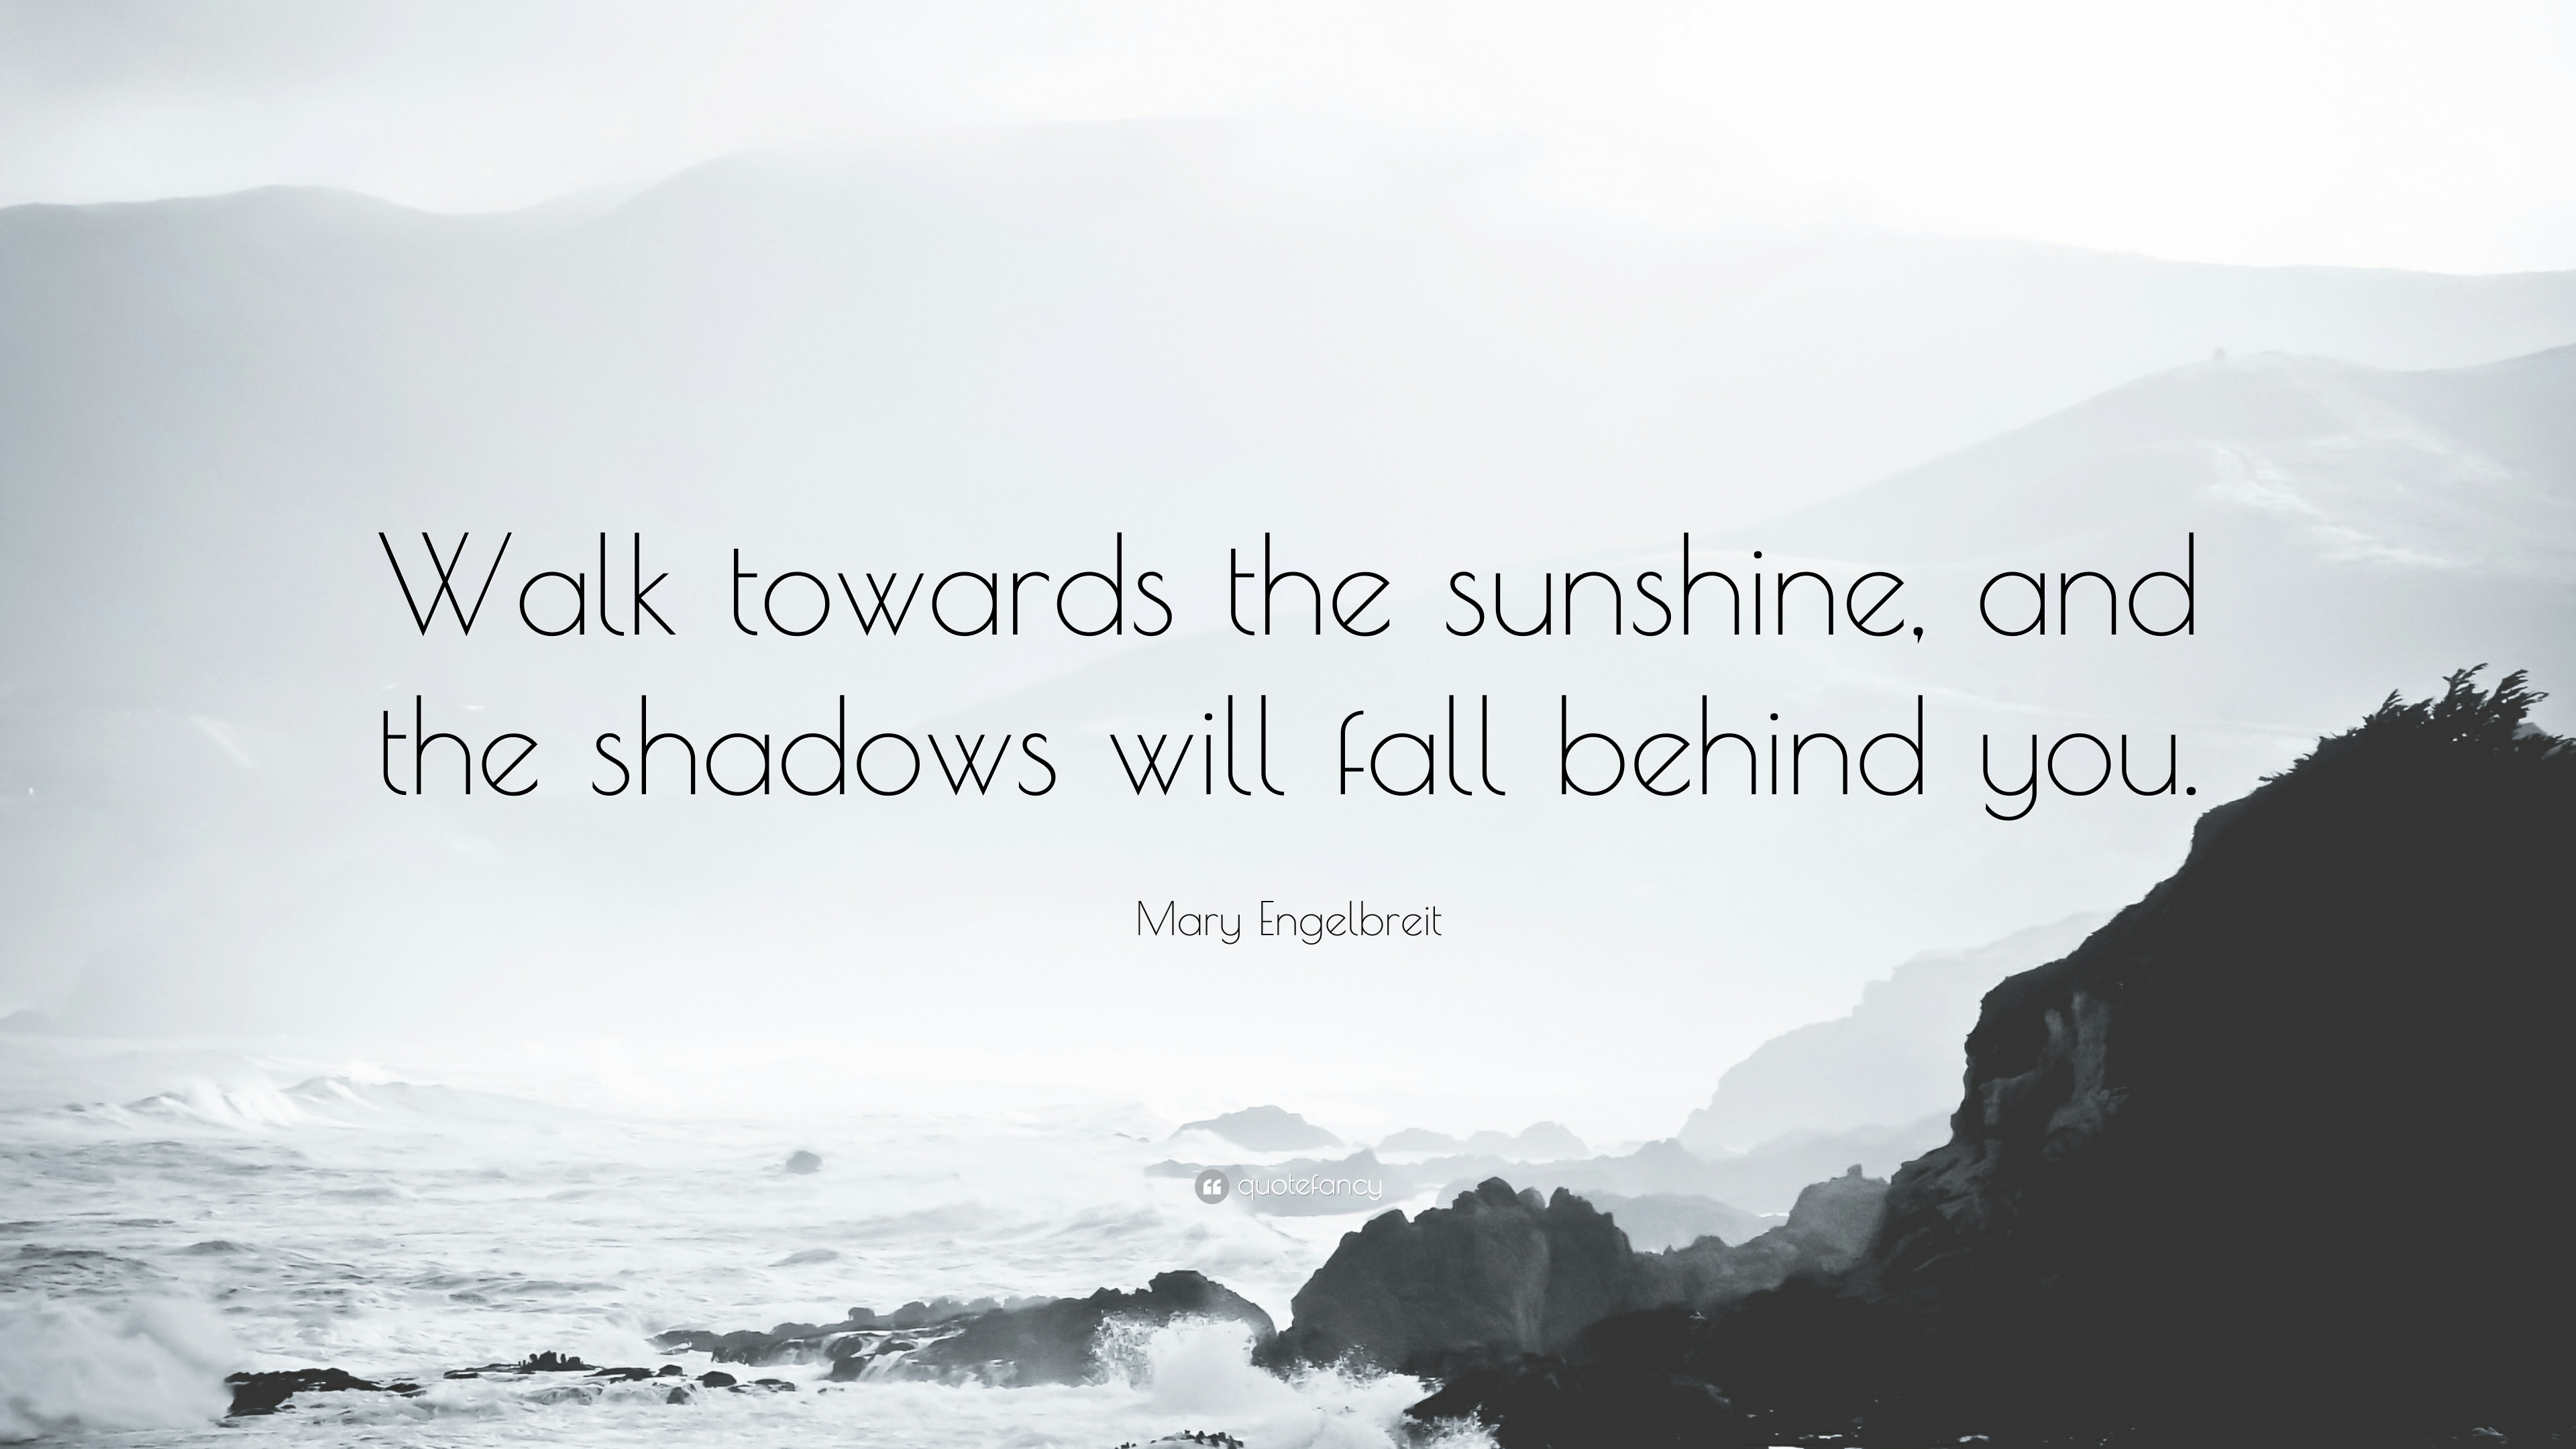 Mary Engelbreit Quote: “Walk towards the sunshine, and the shadows ...